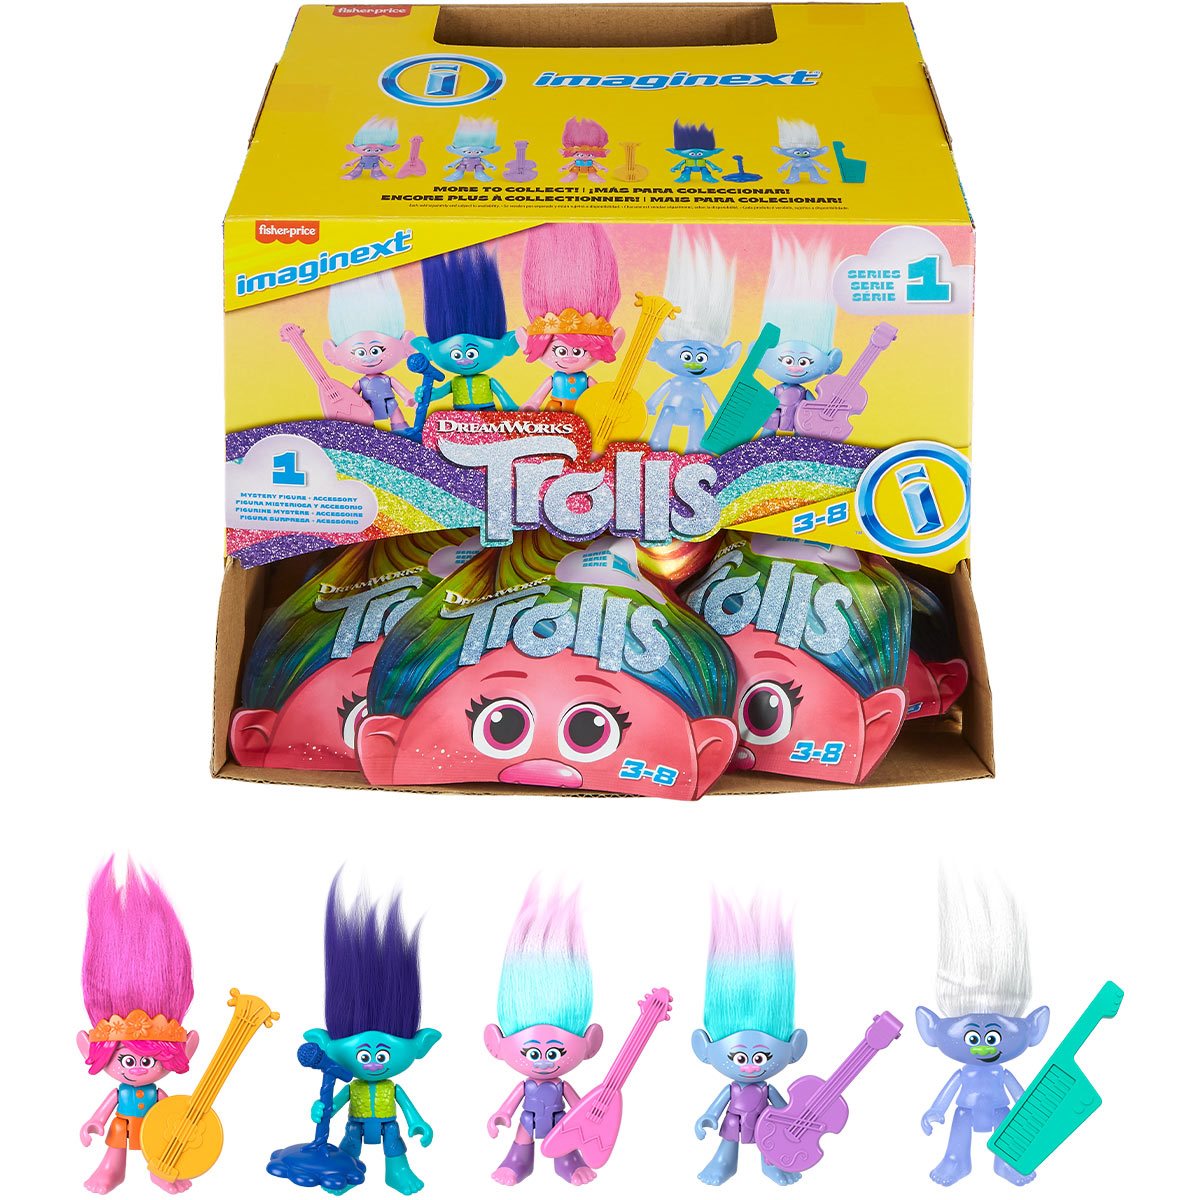 DreamWorks Trolls Band Together Hairsational Reveals Queen Poppy Fashion  Doll